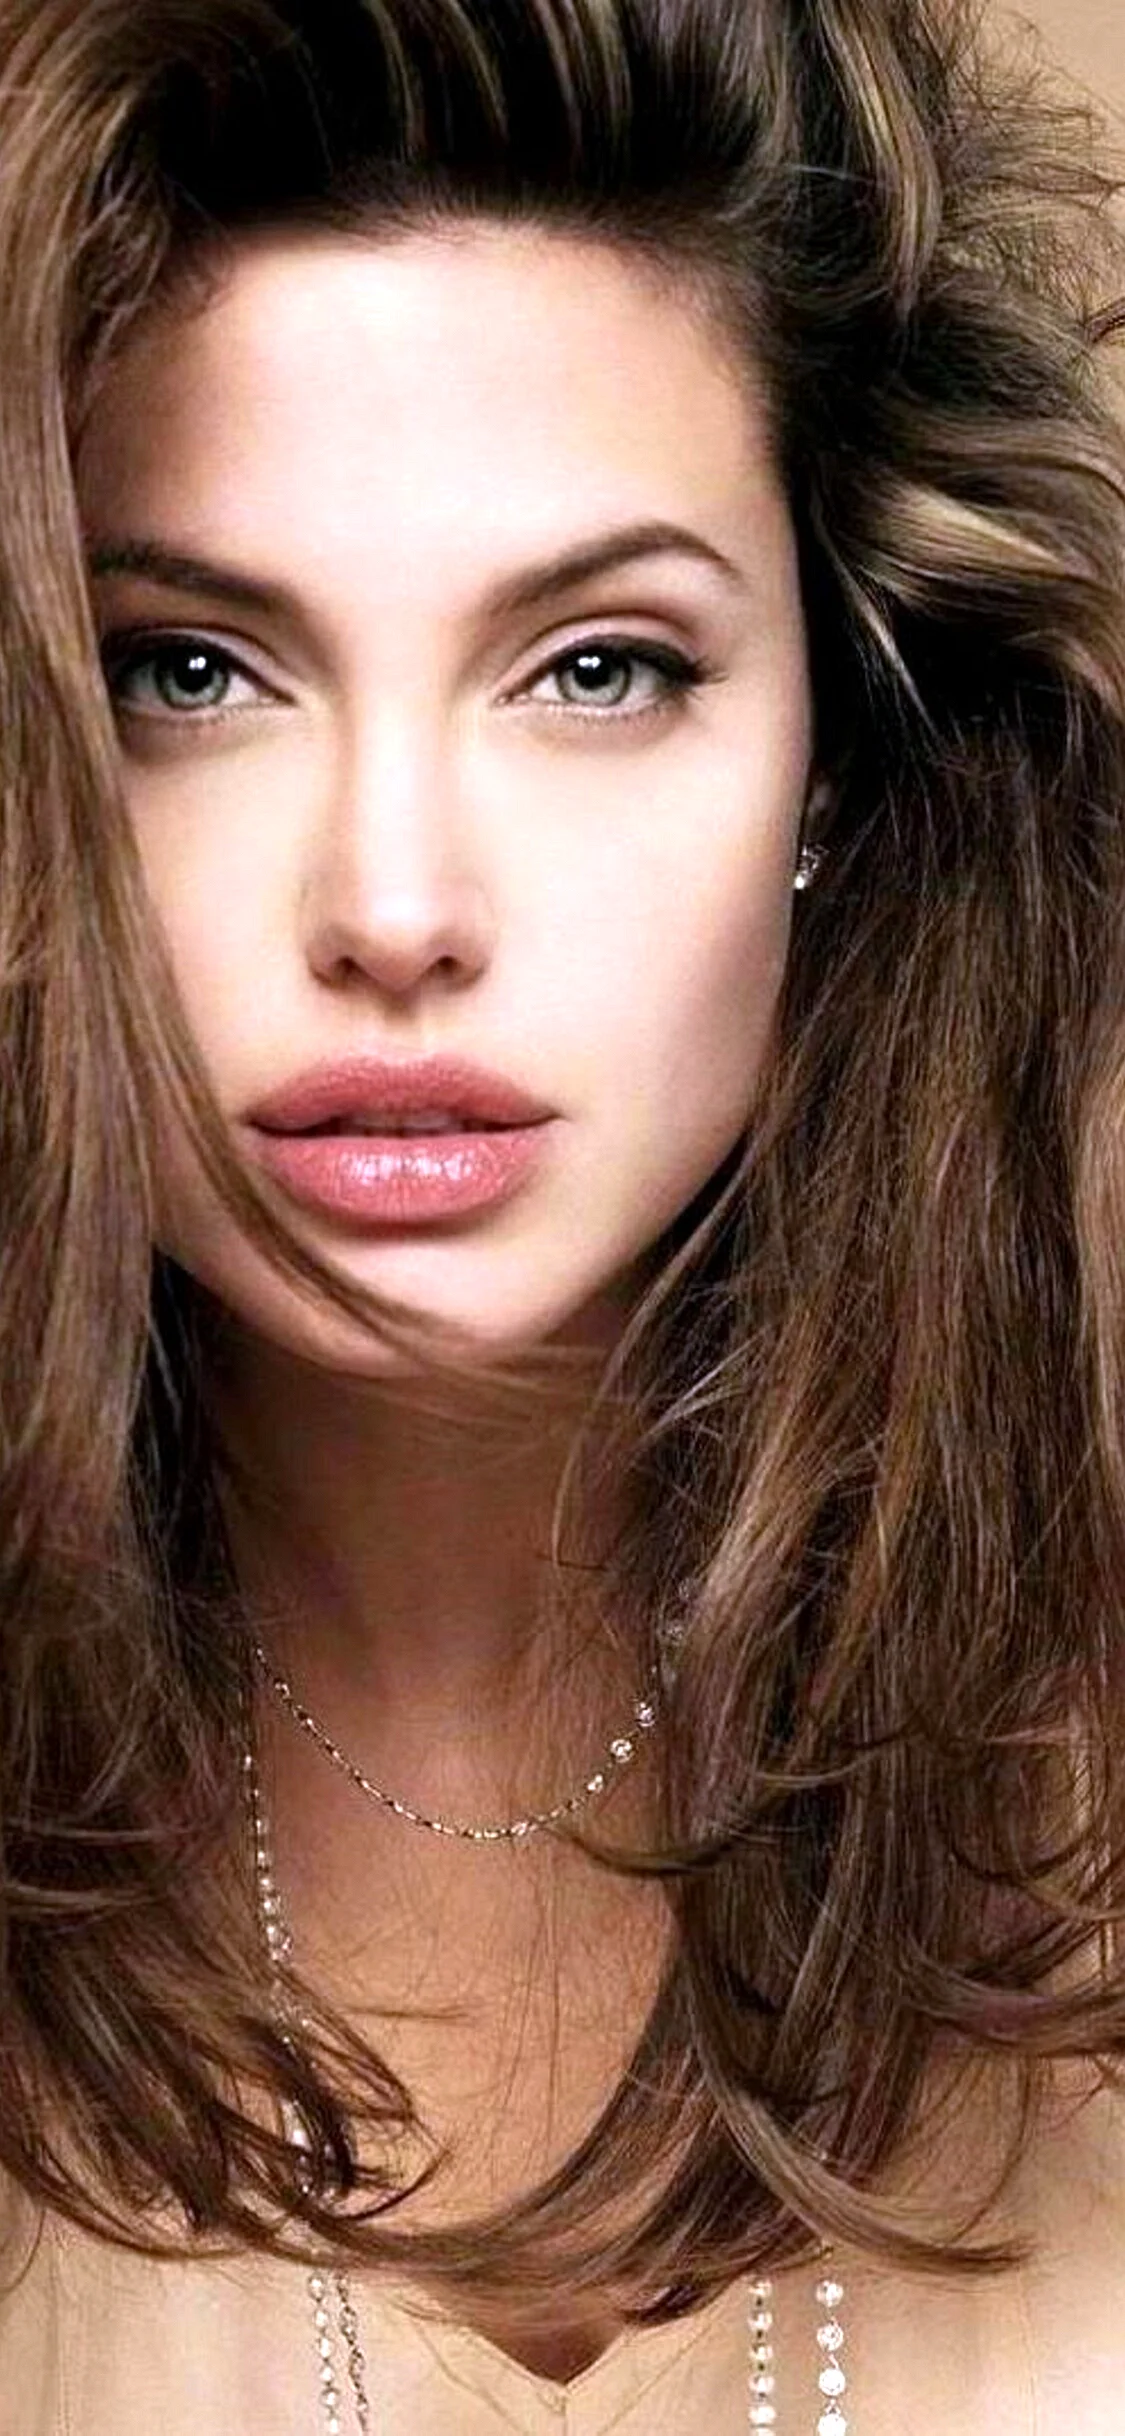 Angelina Jolie Wallpaper for iPhone 11 Pro